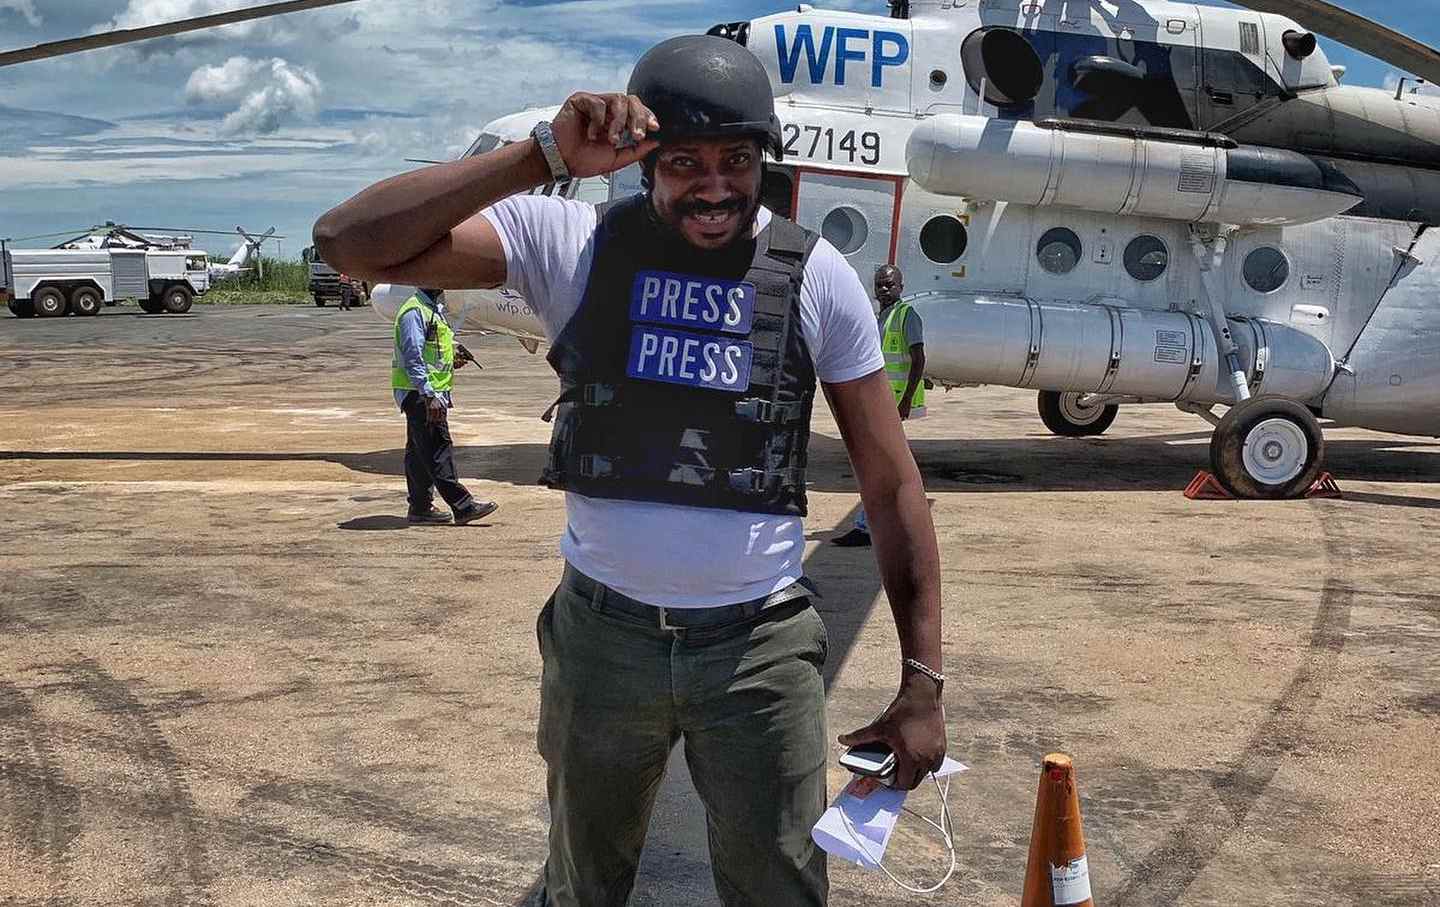 Why Does the Democratic Republic of the Congo Keep Arresting Journalists?